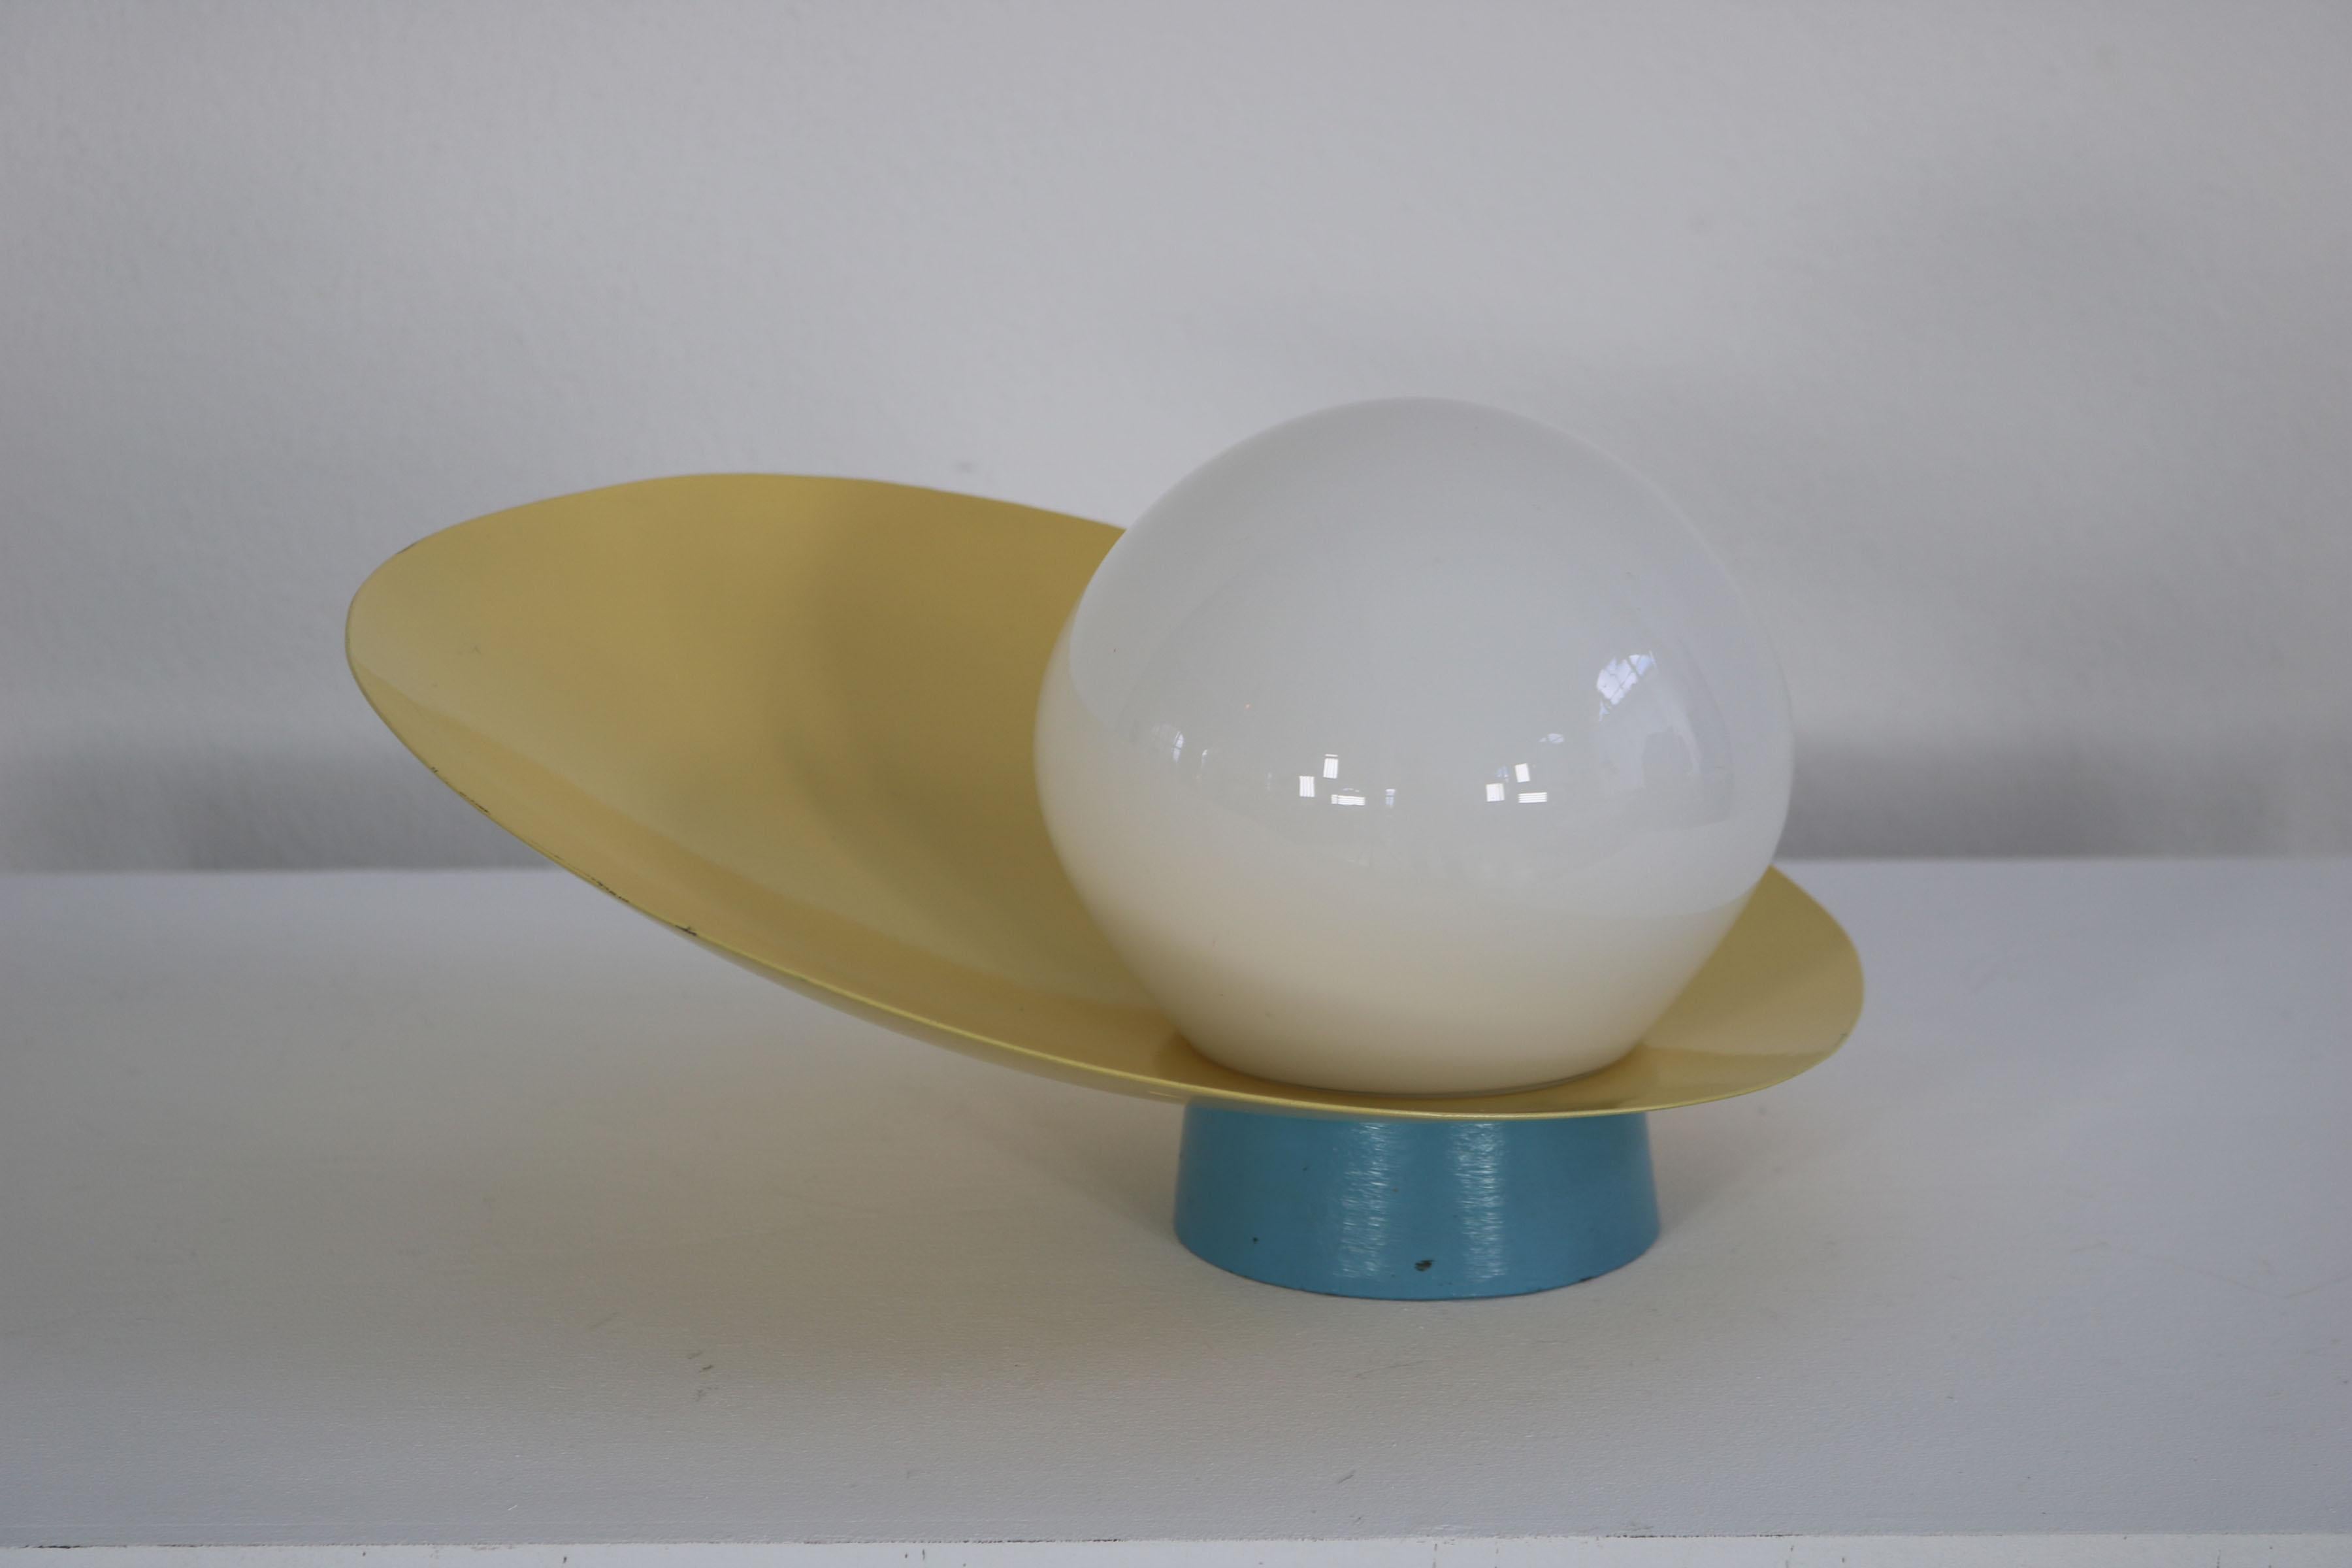 Italian decorative wall lamp from the 1960s. The light blue base of the lamp is a cast iron that shows slight signs of use especially on the bottom of the lamp. The yellow shade of the lamp is made of aluminum and the white glass ball in the center